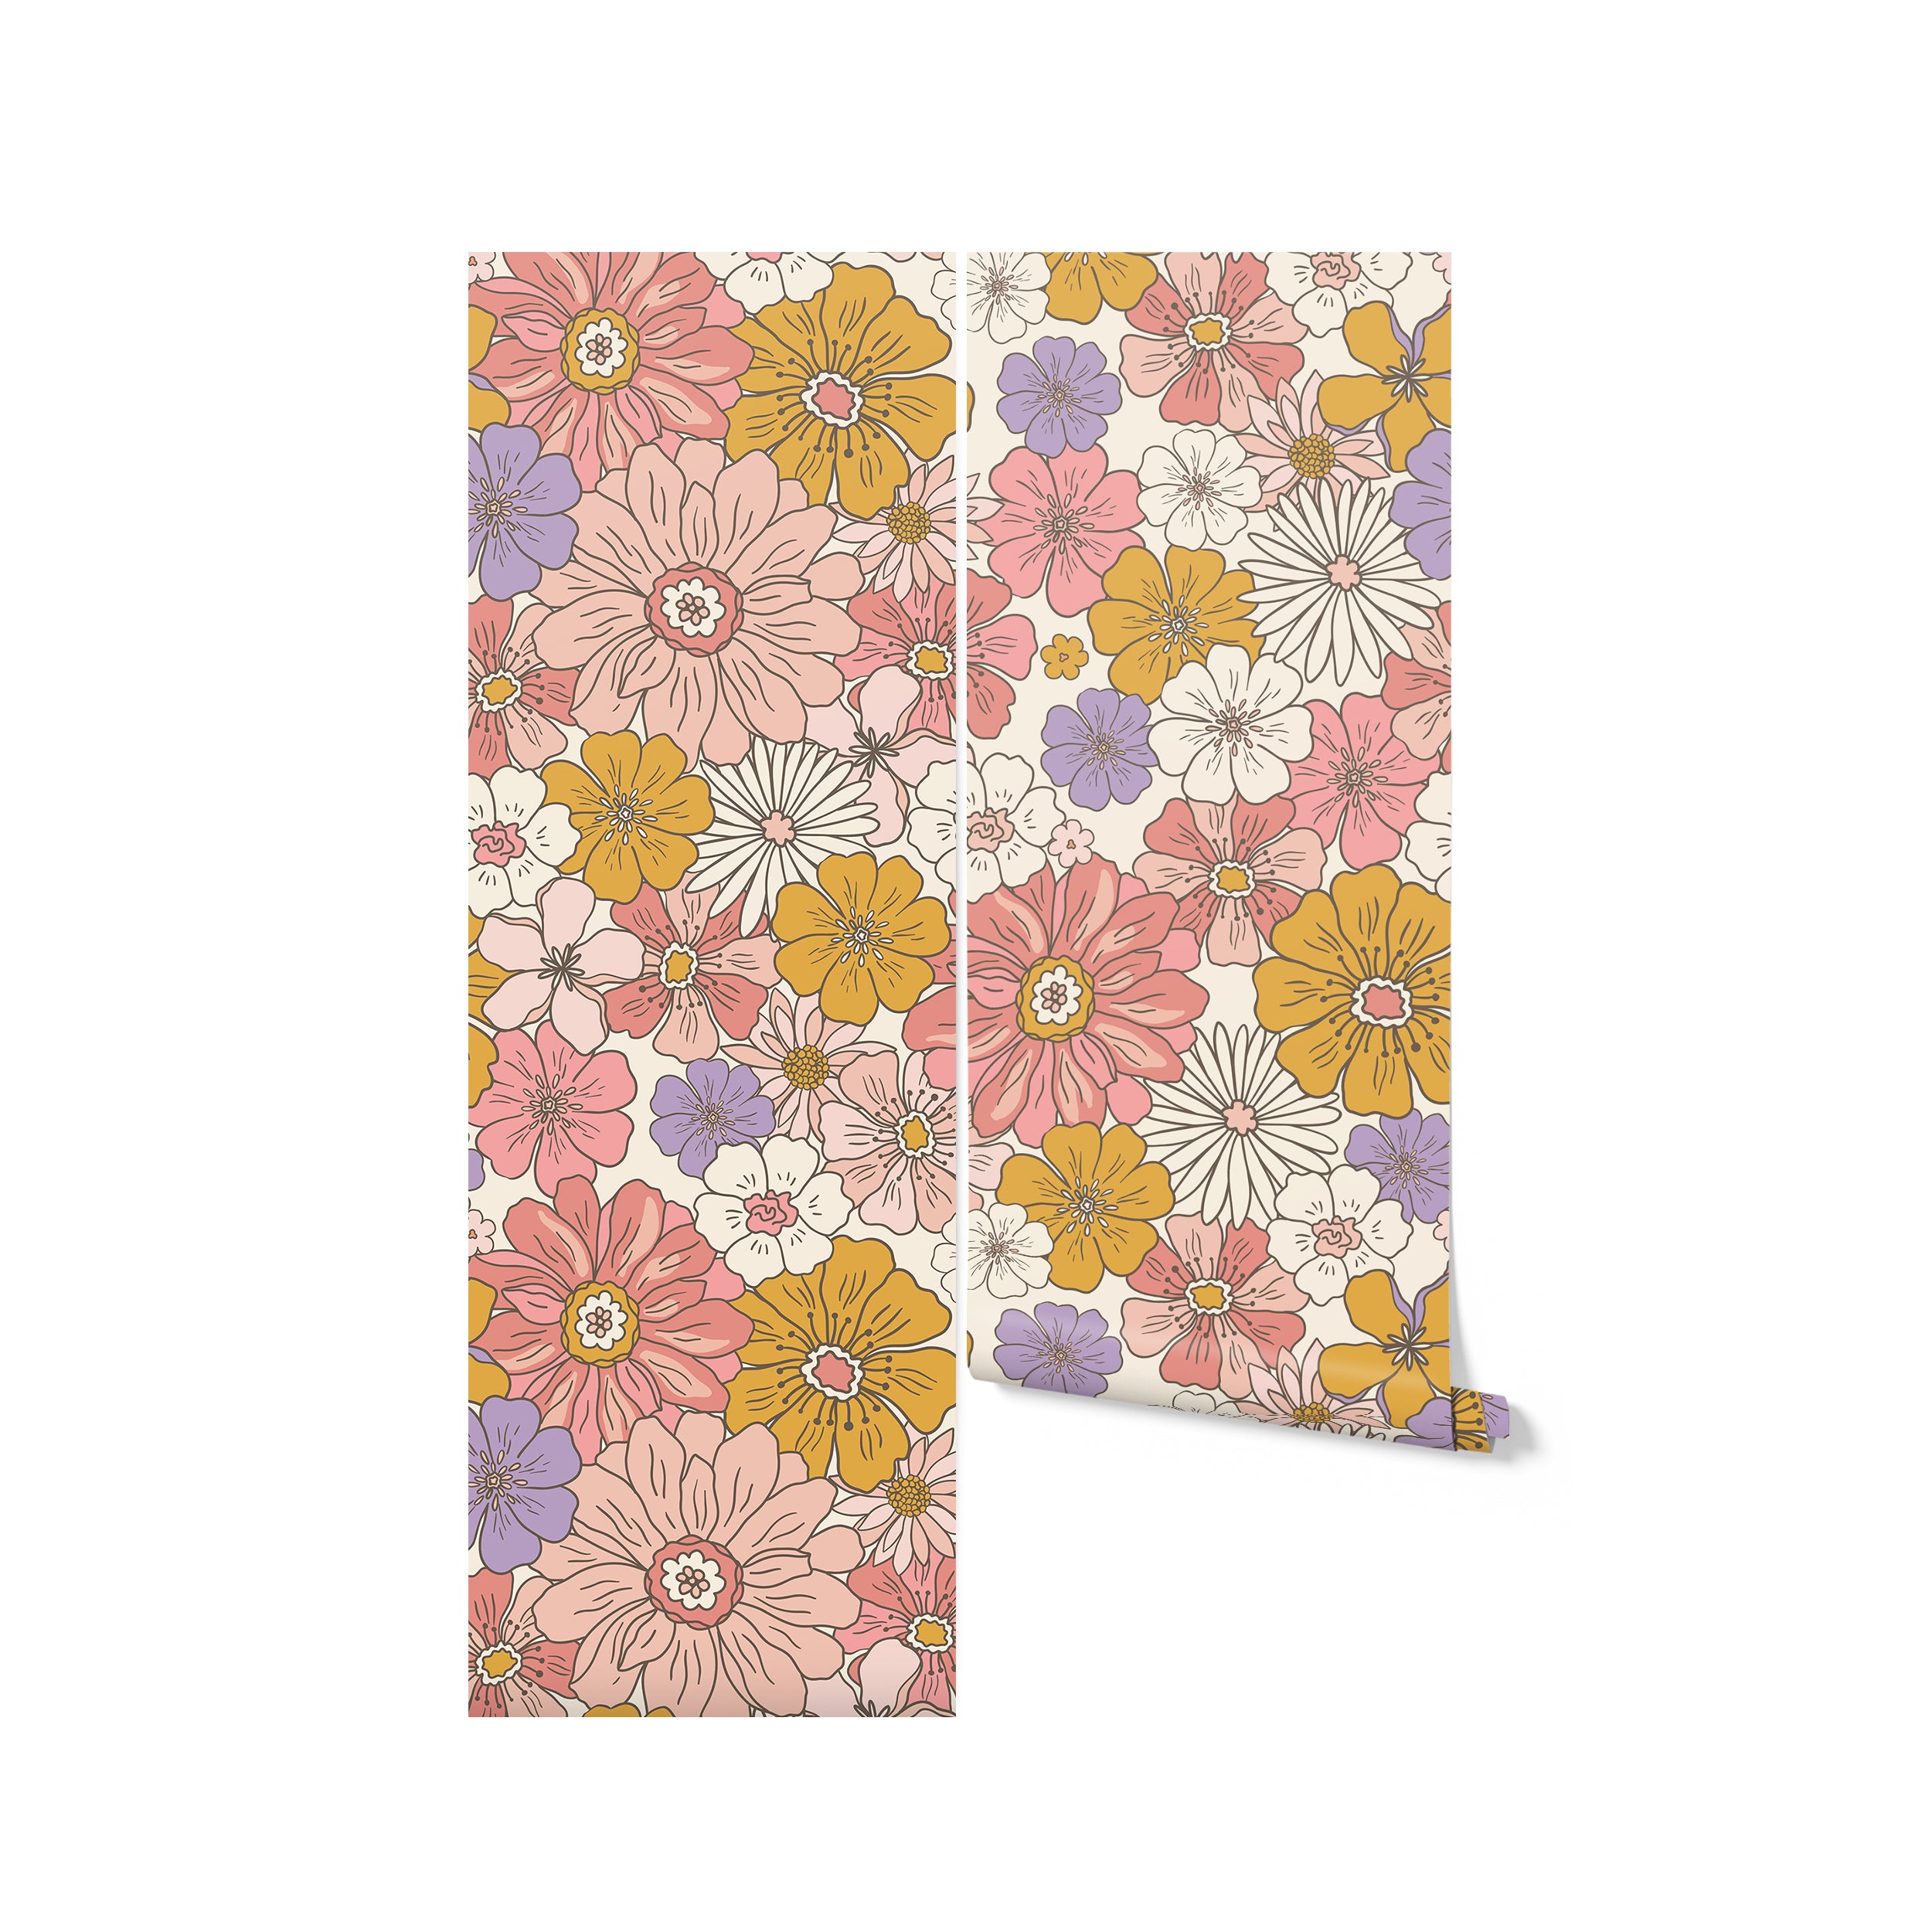 A roll of Retro Groovy Flower Wallpaper showcasing a vibrant mix of large, colorful flowers in retro styles, perfect for adding a bold and cheerful touch to any space